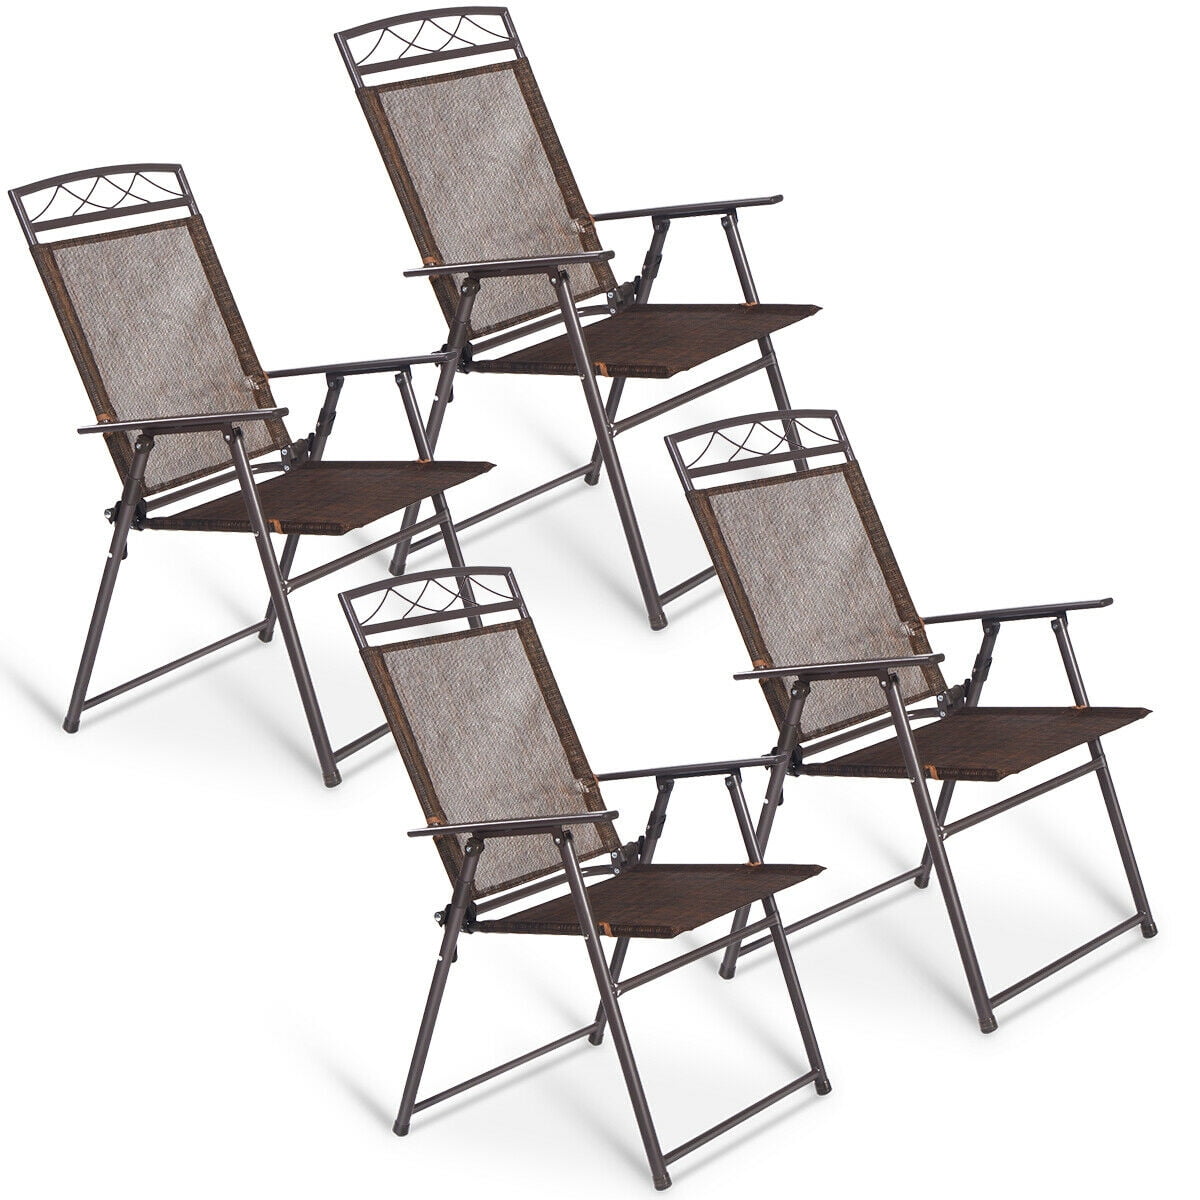 Costway Set of 4 Patio Folding Sling Chairs Steel Textilene Camping Deck Garden Pool